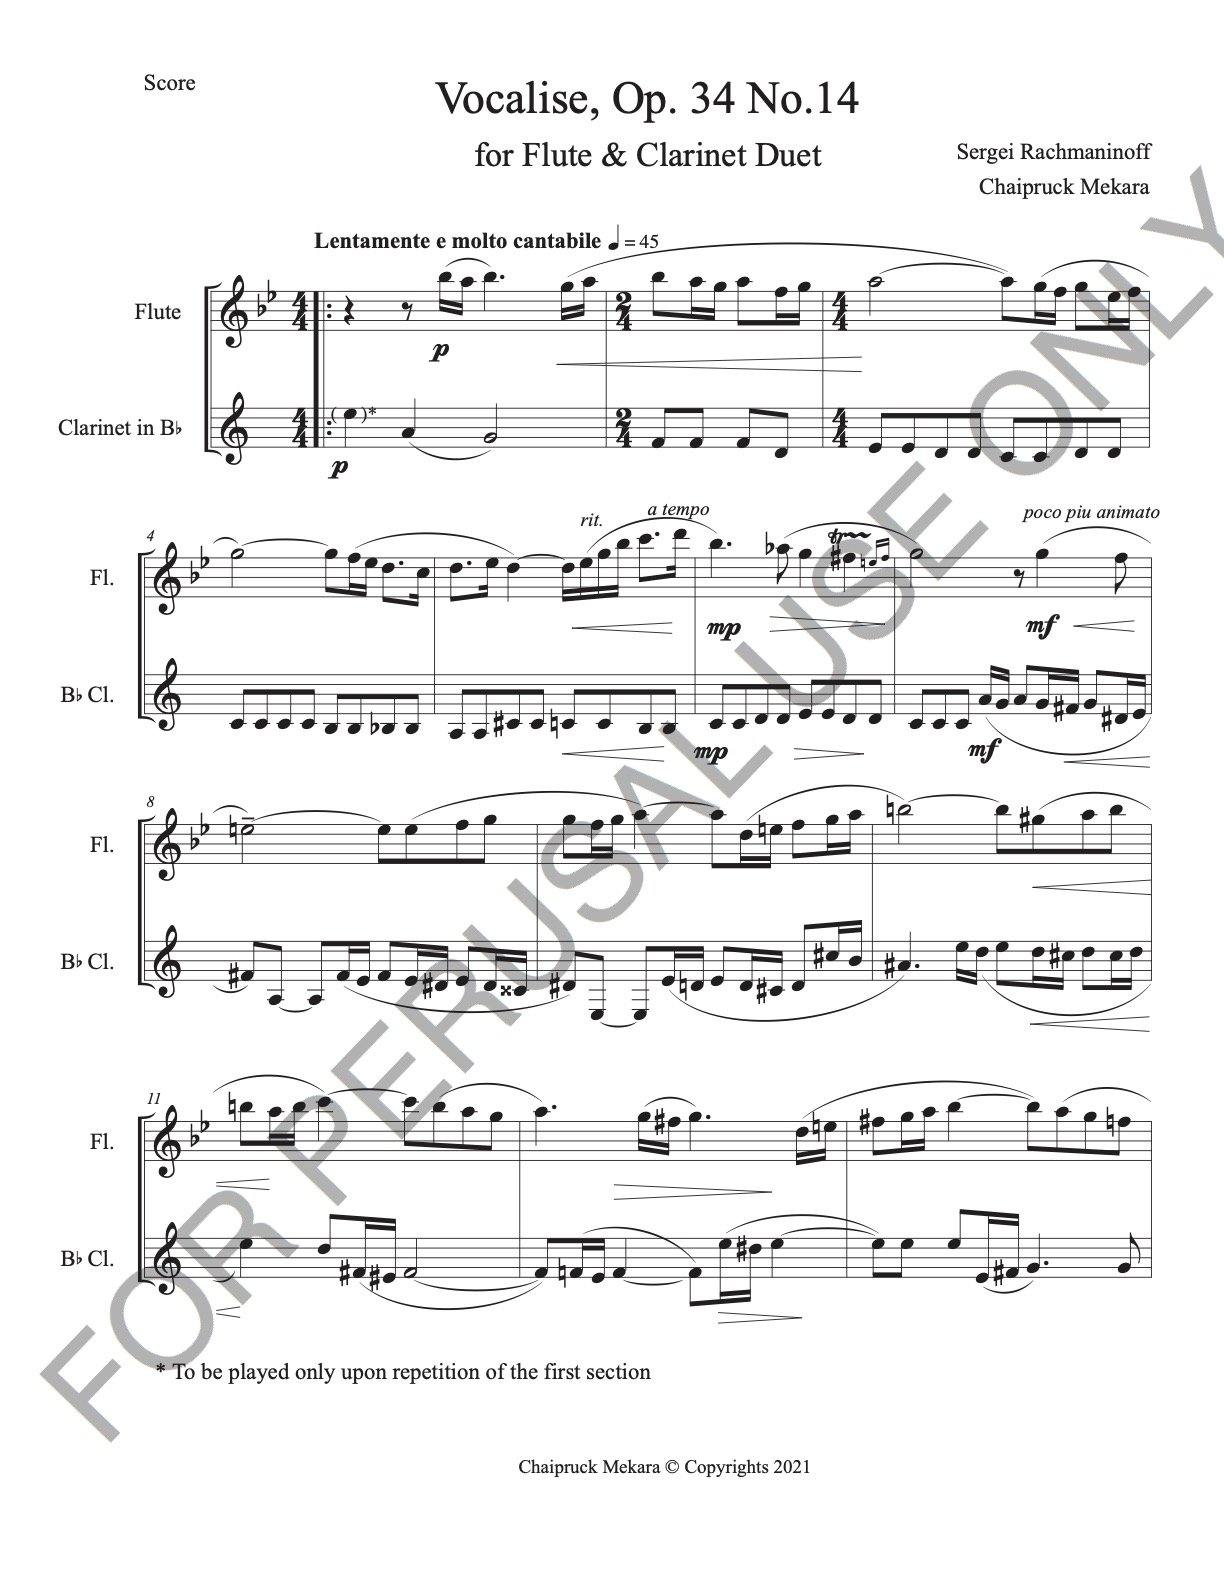 Vocalise, Op. 34 no.14 by Sergei Rachmaninoff for Flute and Clarinet Duet (score+parts) - ChaipruckMekara